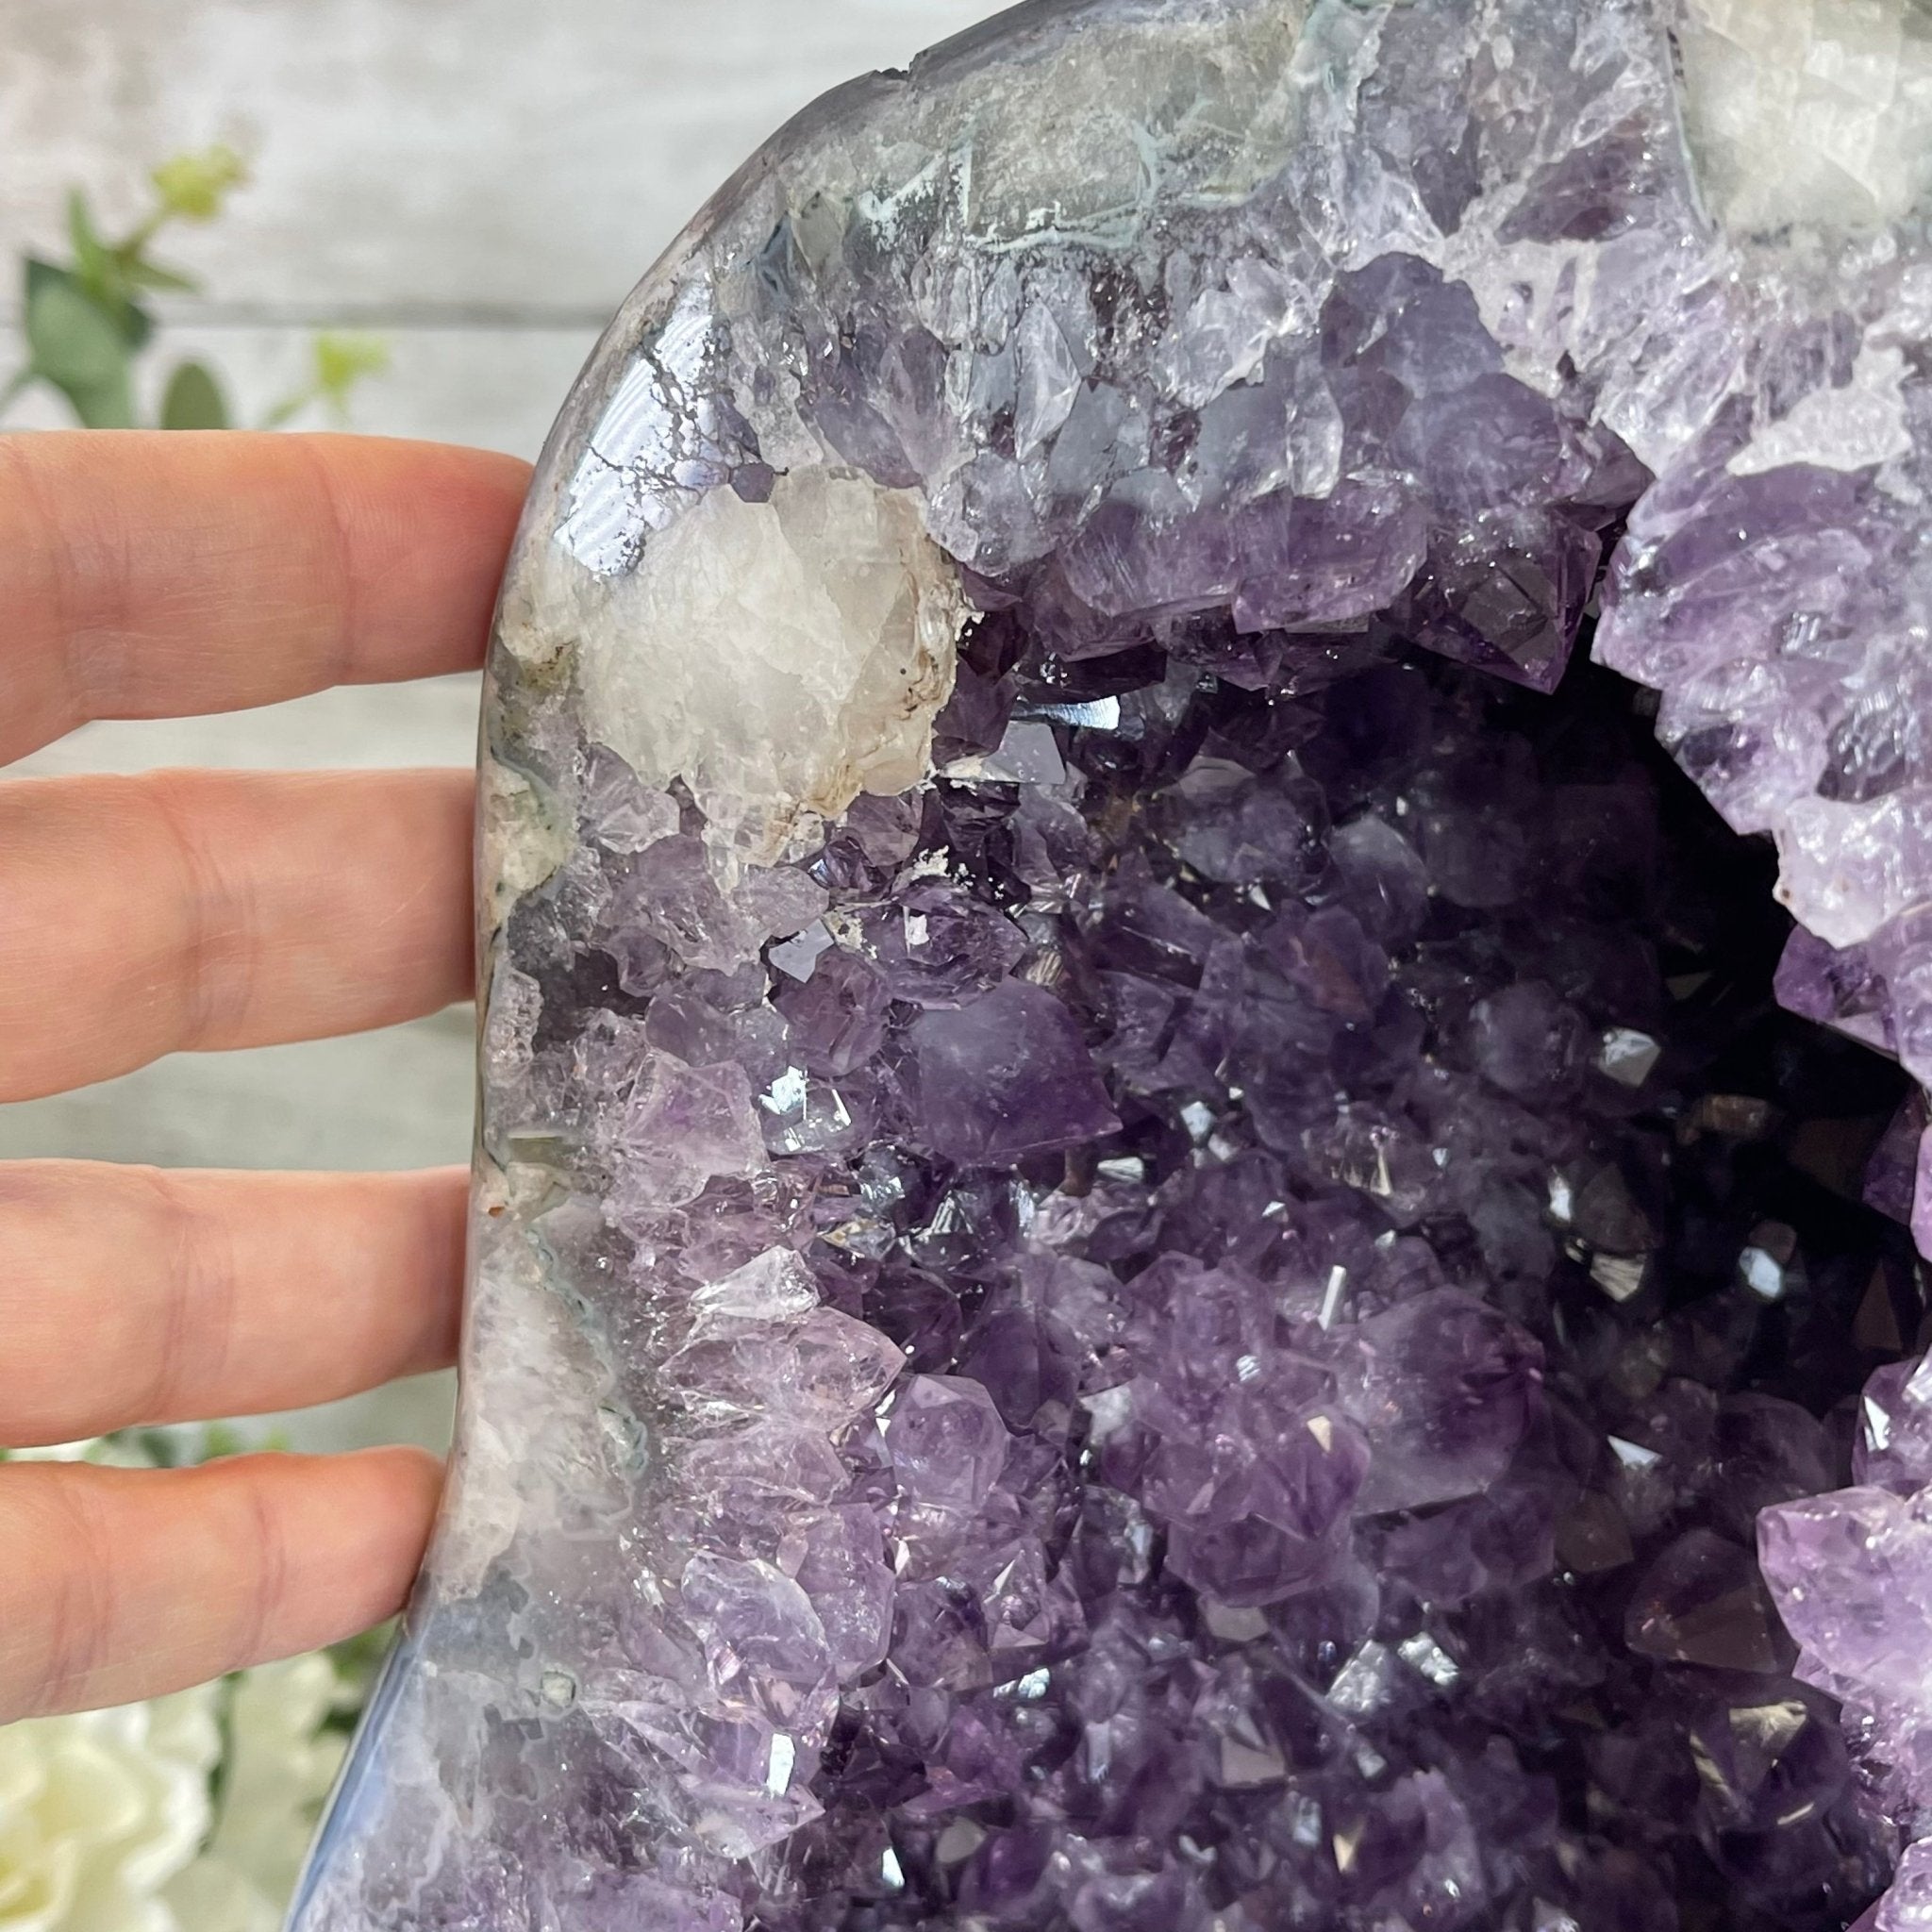 Extra Quality Brazilian Amethyst Cathedral, 30.7 lbs & 13.5" Tall #5601-1124 by Brazil Gems - Brazil GemsBrazil GemsExtra Quality Brazilian Amethyst Cathedral, 30.7 lbs & 13.5" Tall #5601-1124 by Brazil GemsCathedrals5601-1124